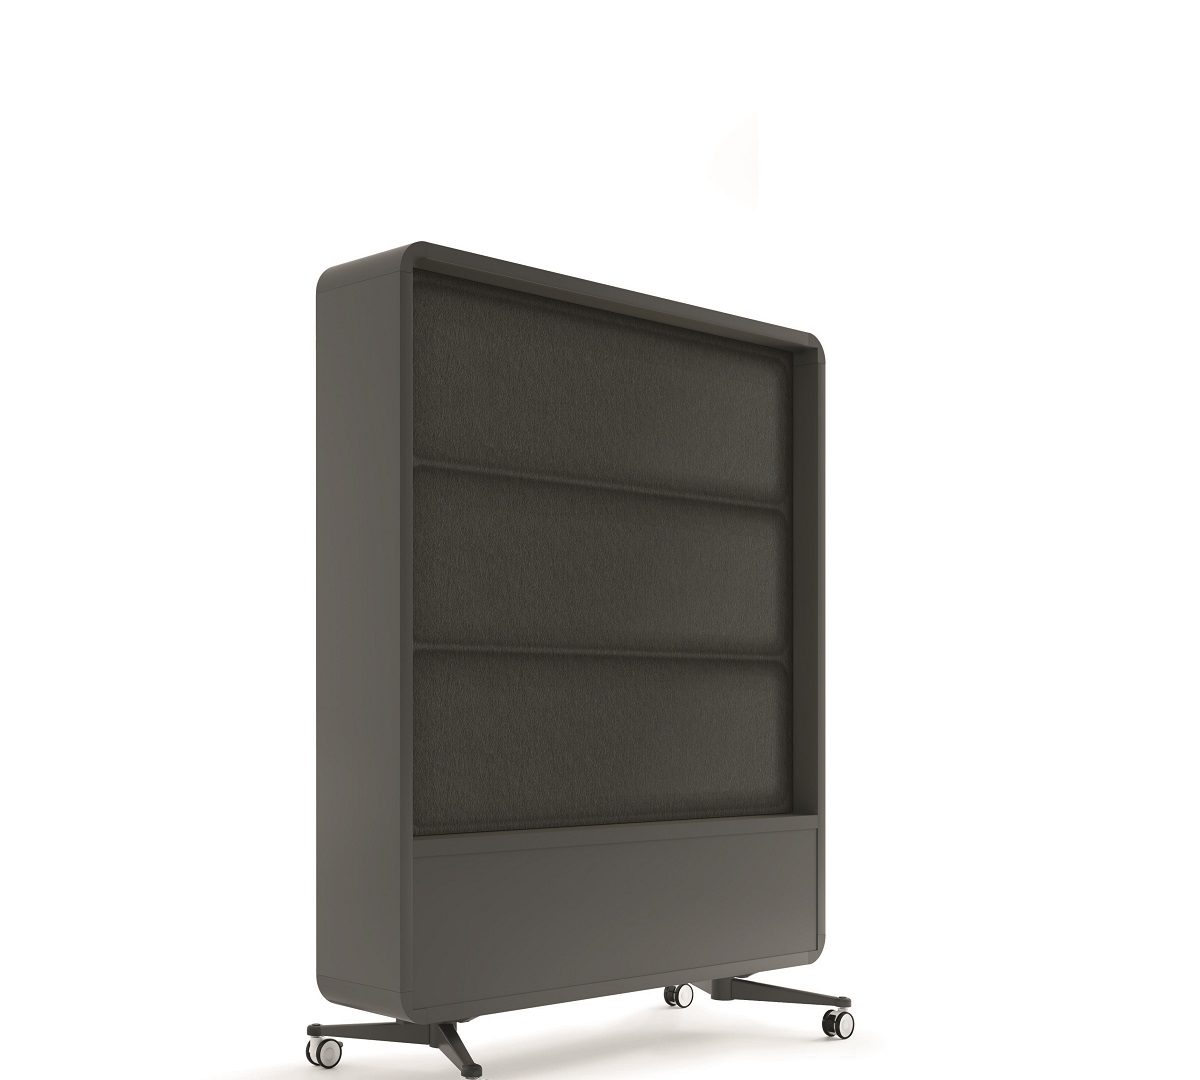 Becoming more agile? Portable office dividers like hushWall are the building blocks of an agile office.